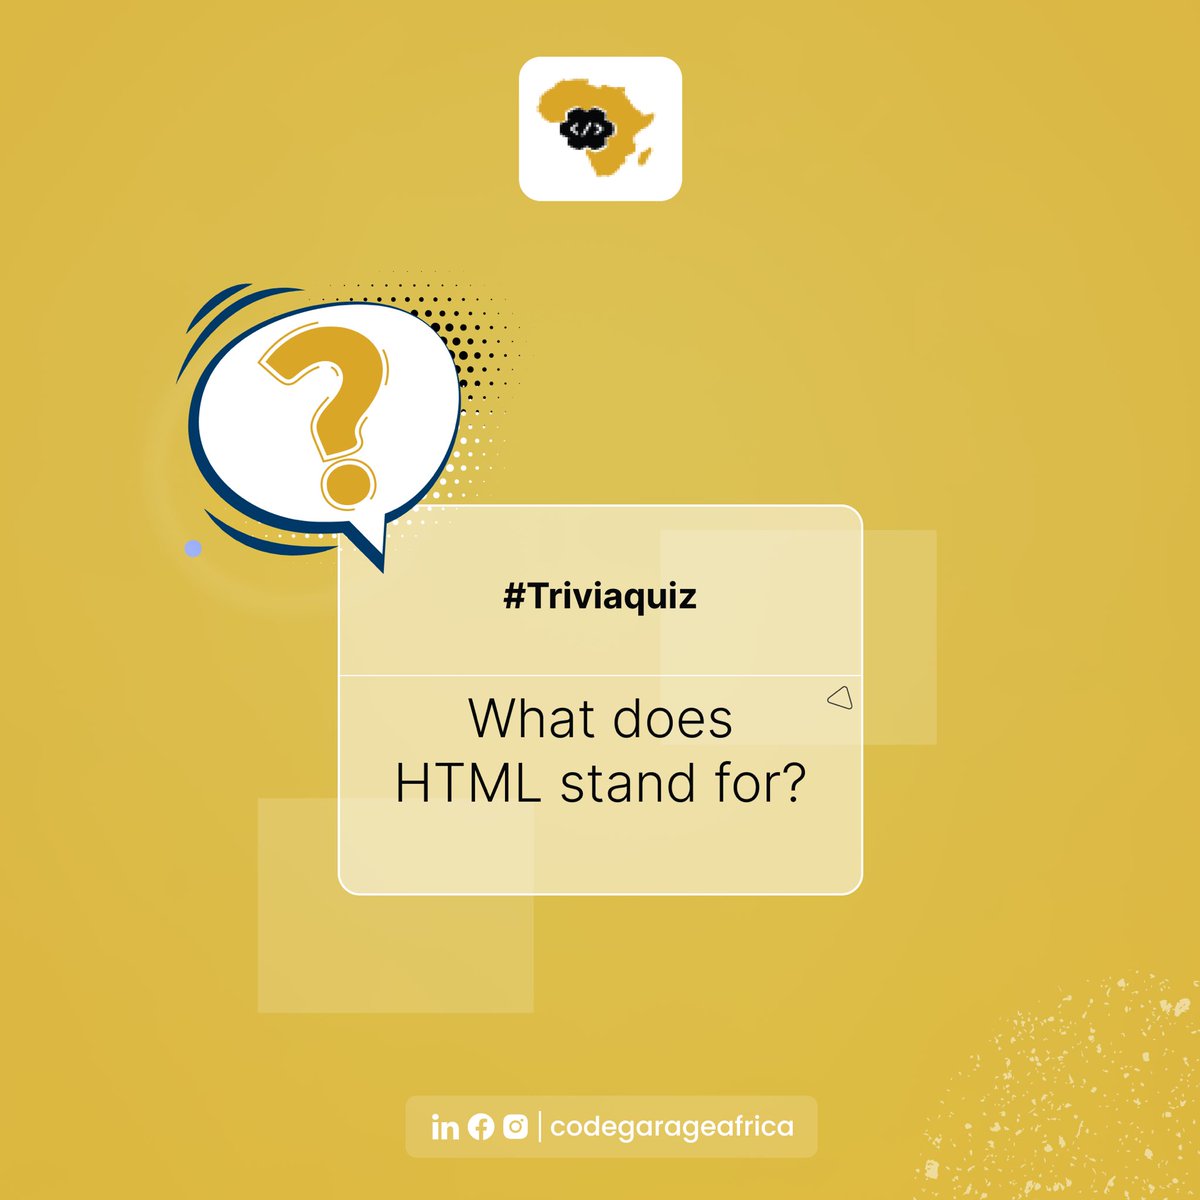 Leave your answers as comments. 
Happy Friday!

#triviaquiz #tgif #codegarageafrica